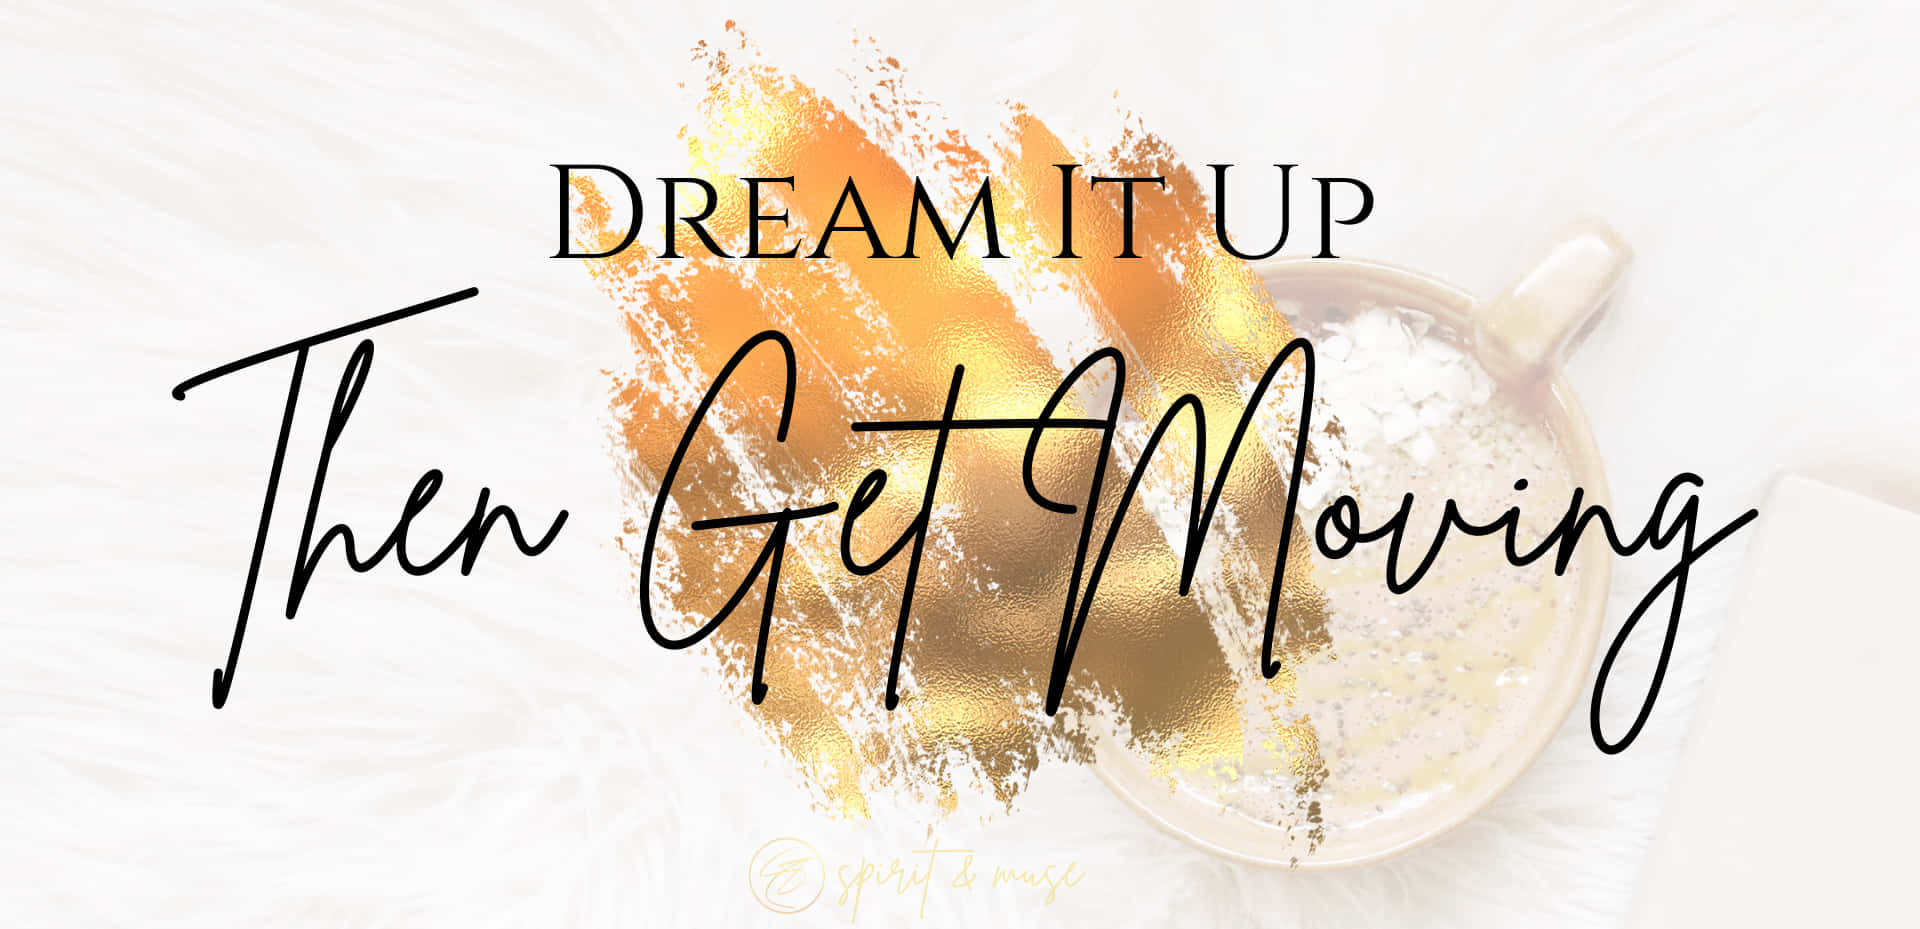 Dream It Up Then Get Moving